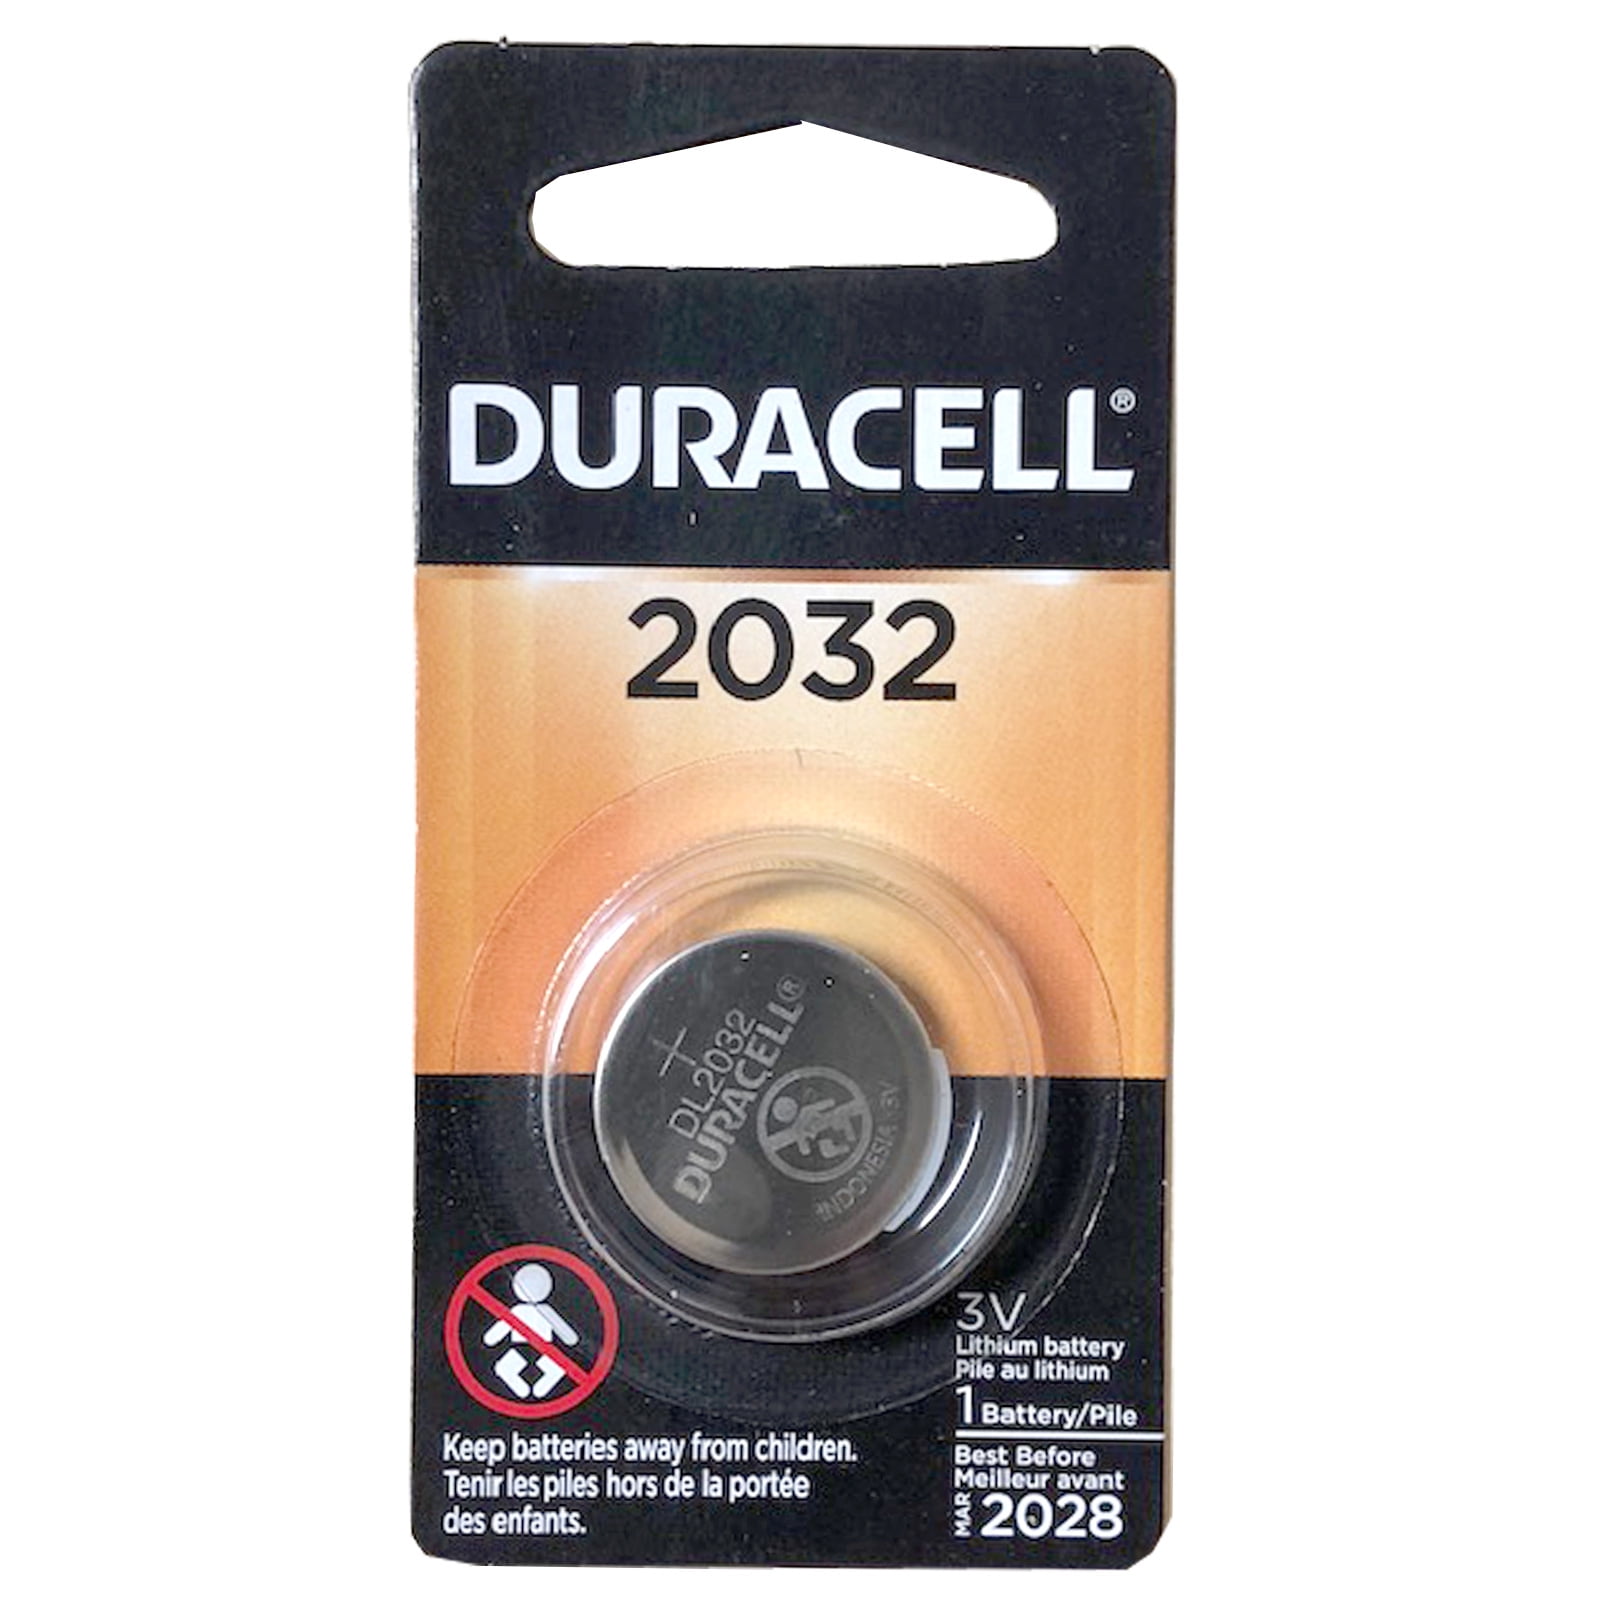 12 x Duracell CR2032 3V Lithium Coin Cell Batteries Best Before 2028